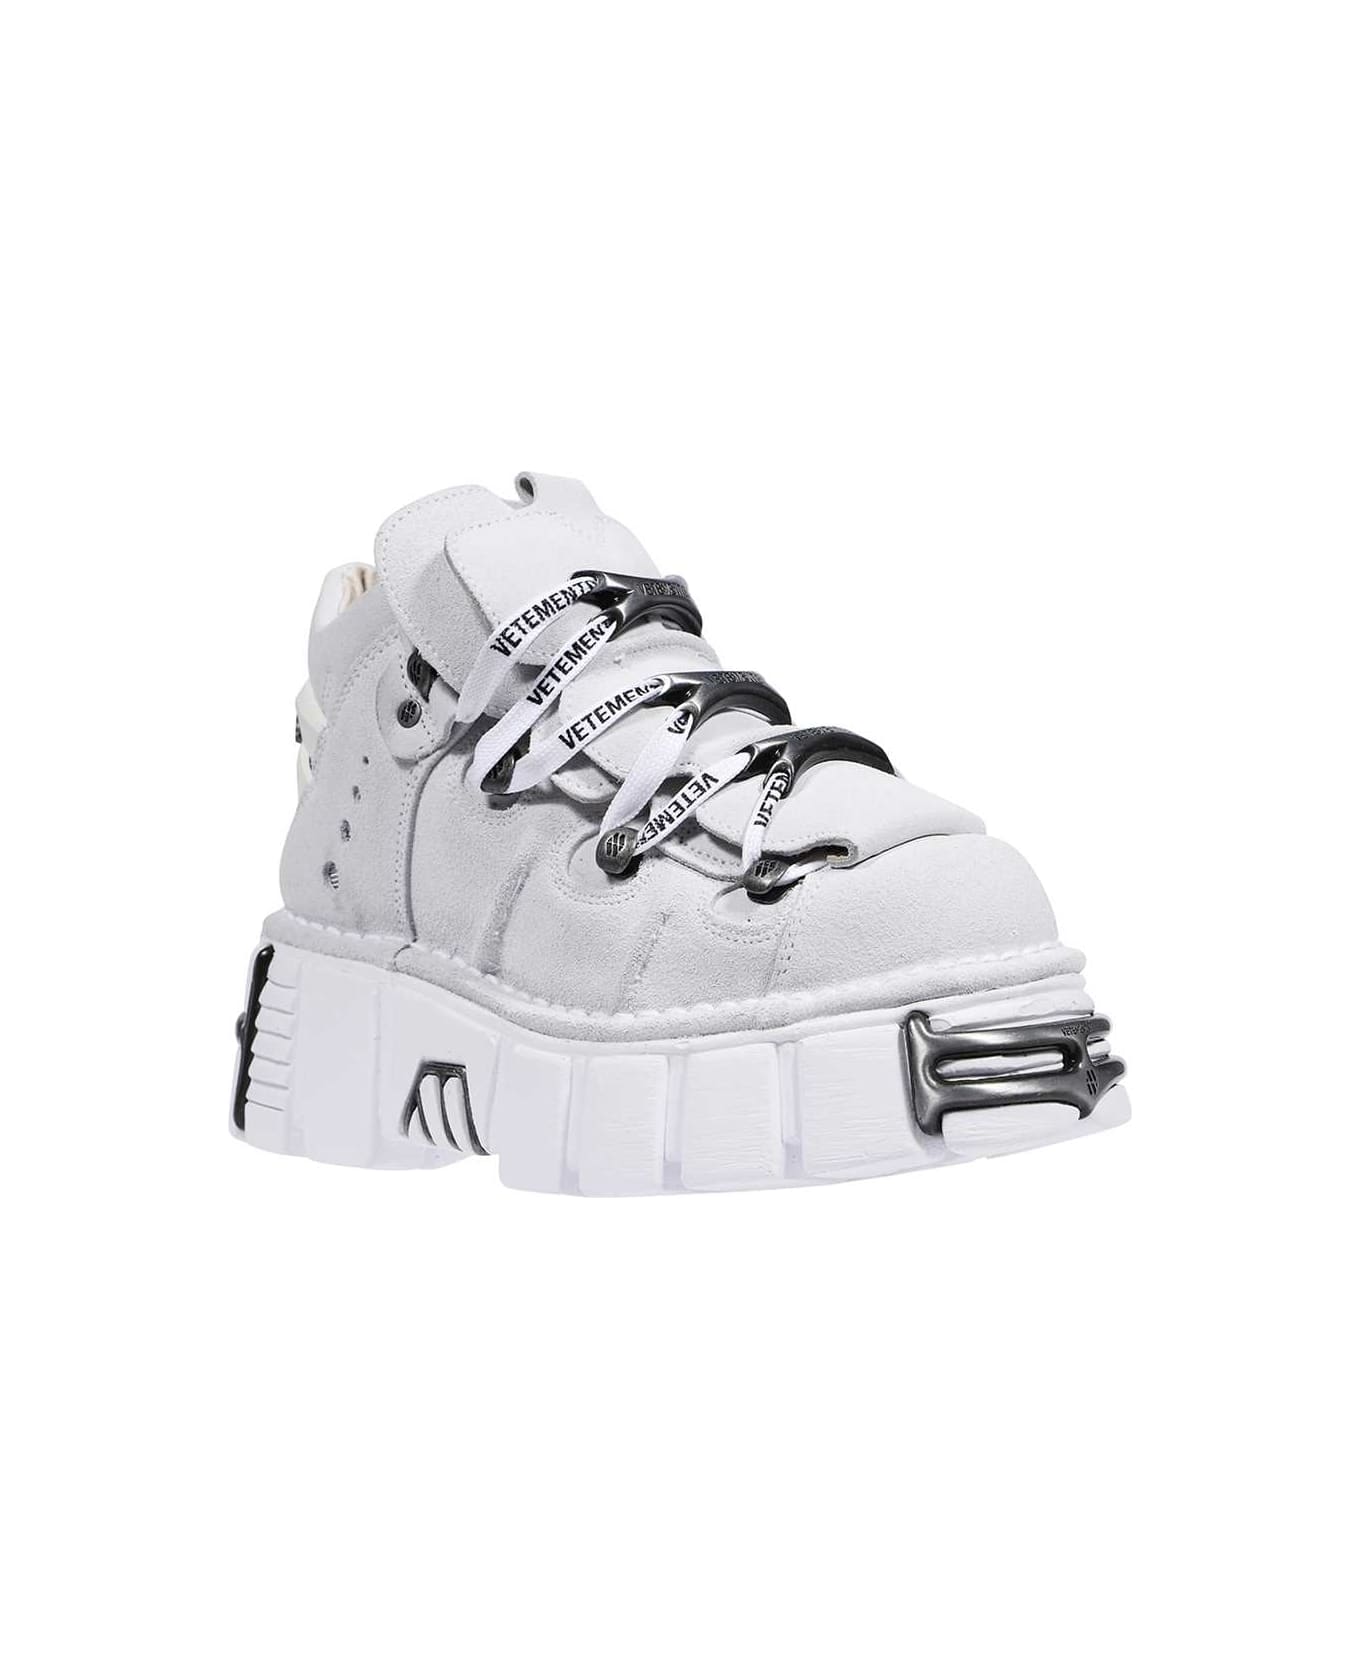 VETEMENTS Leather Platform Sneakers - White